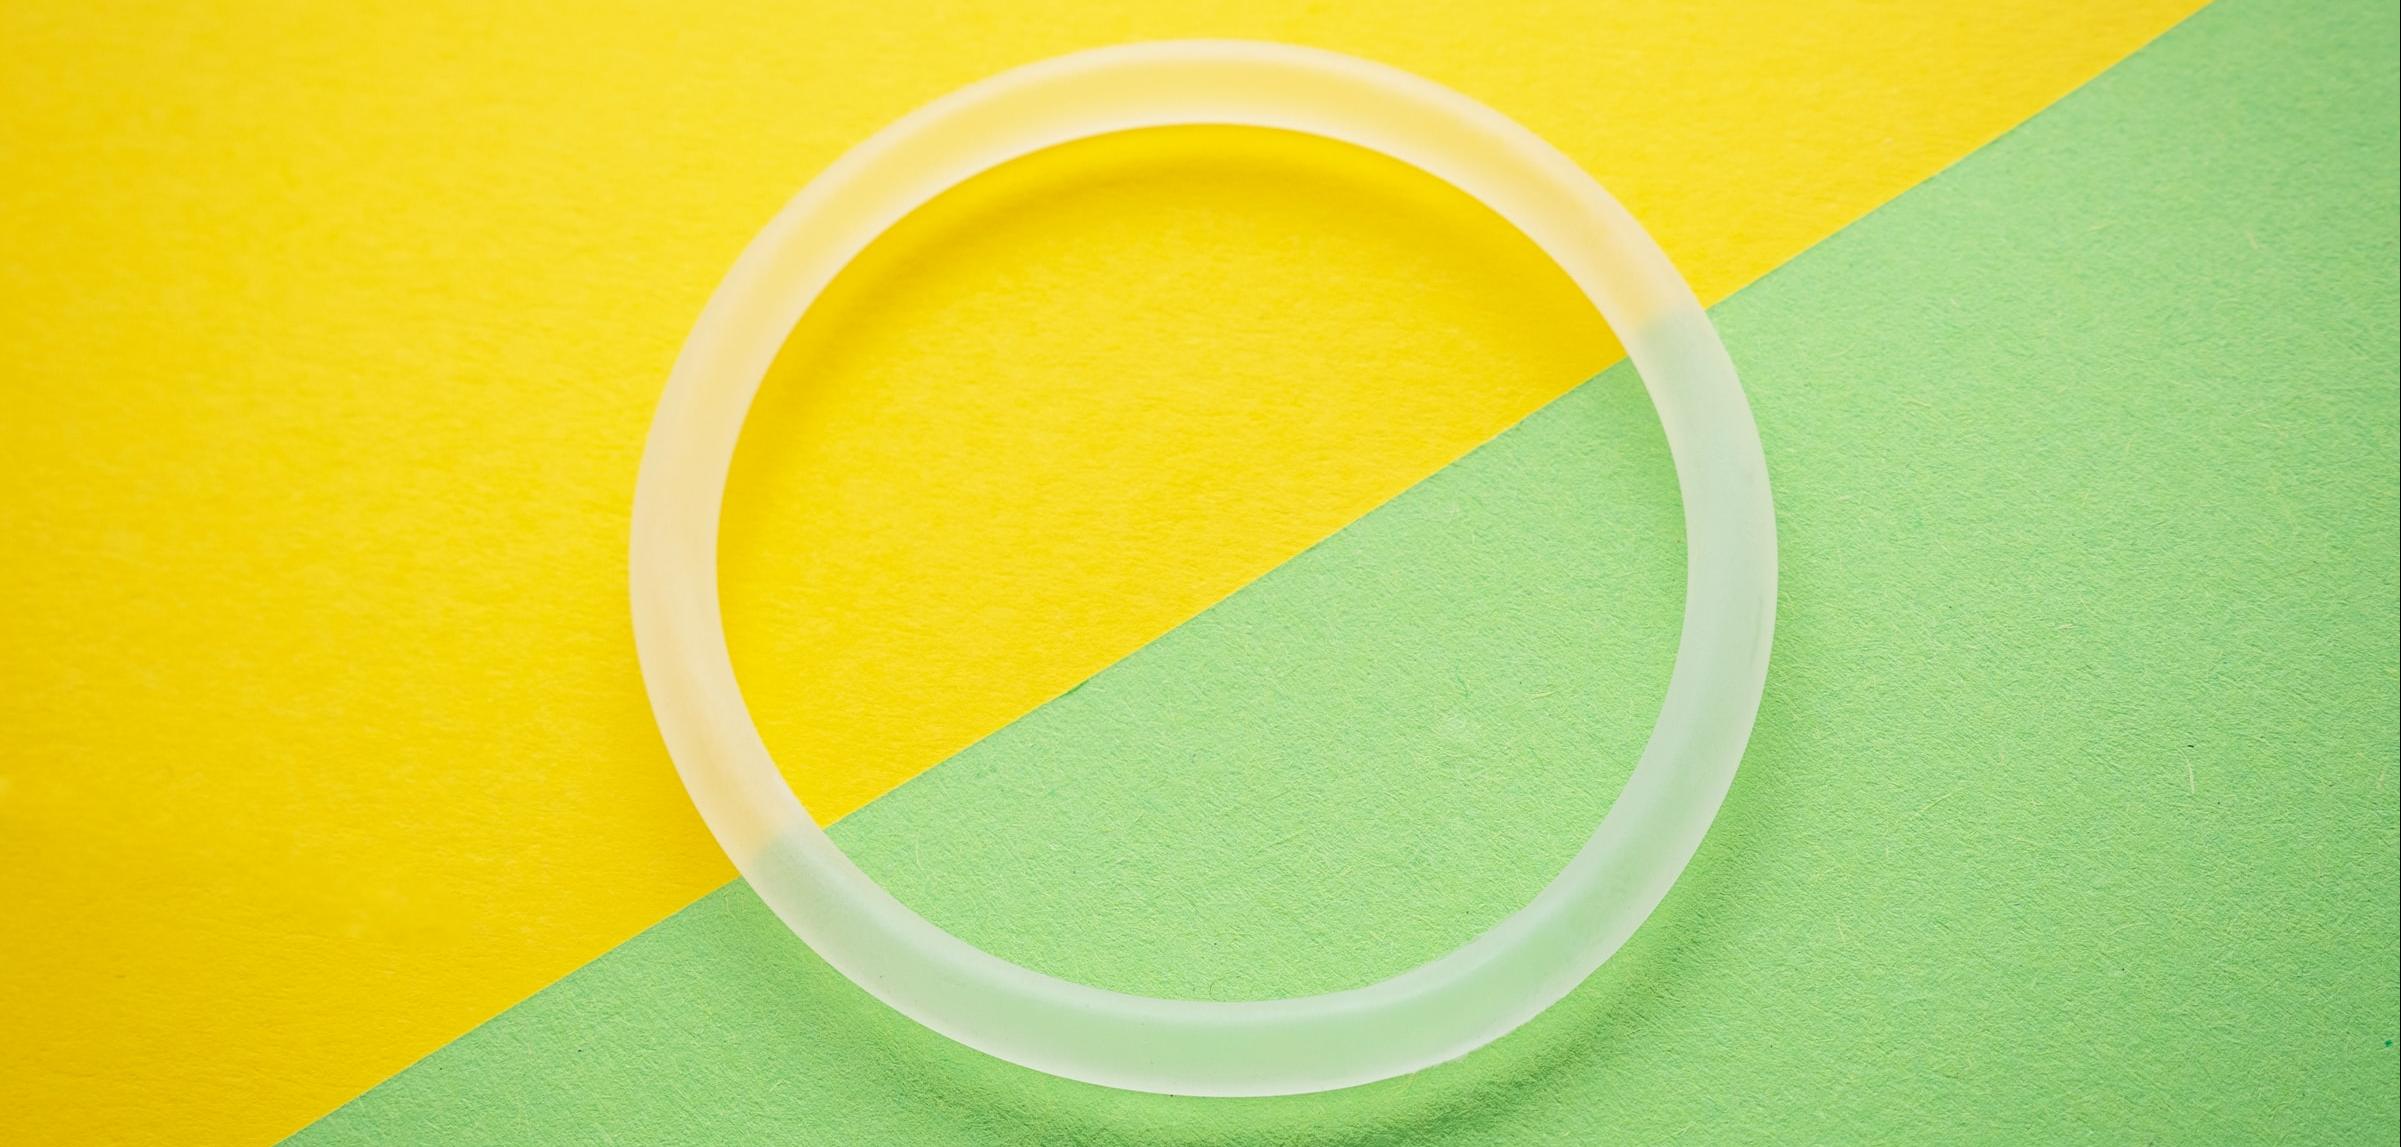 the ring birth control on a yellow and green background